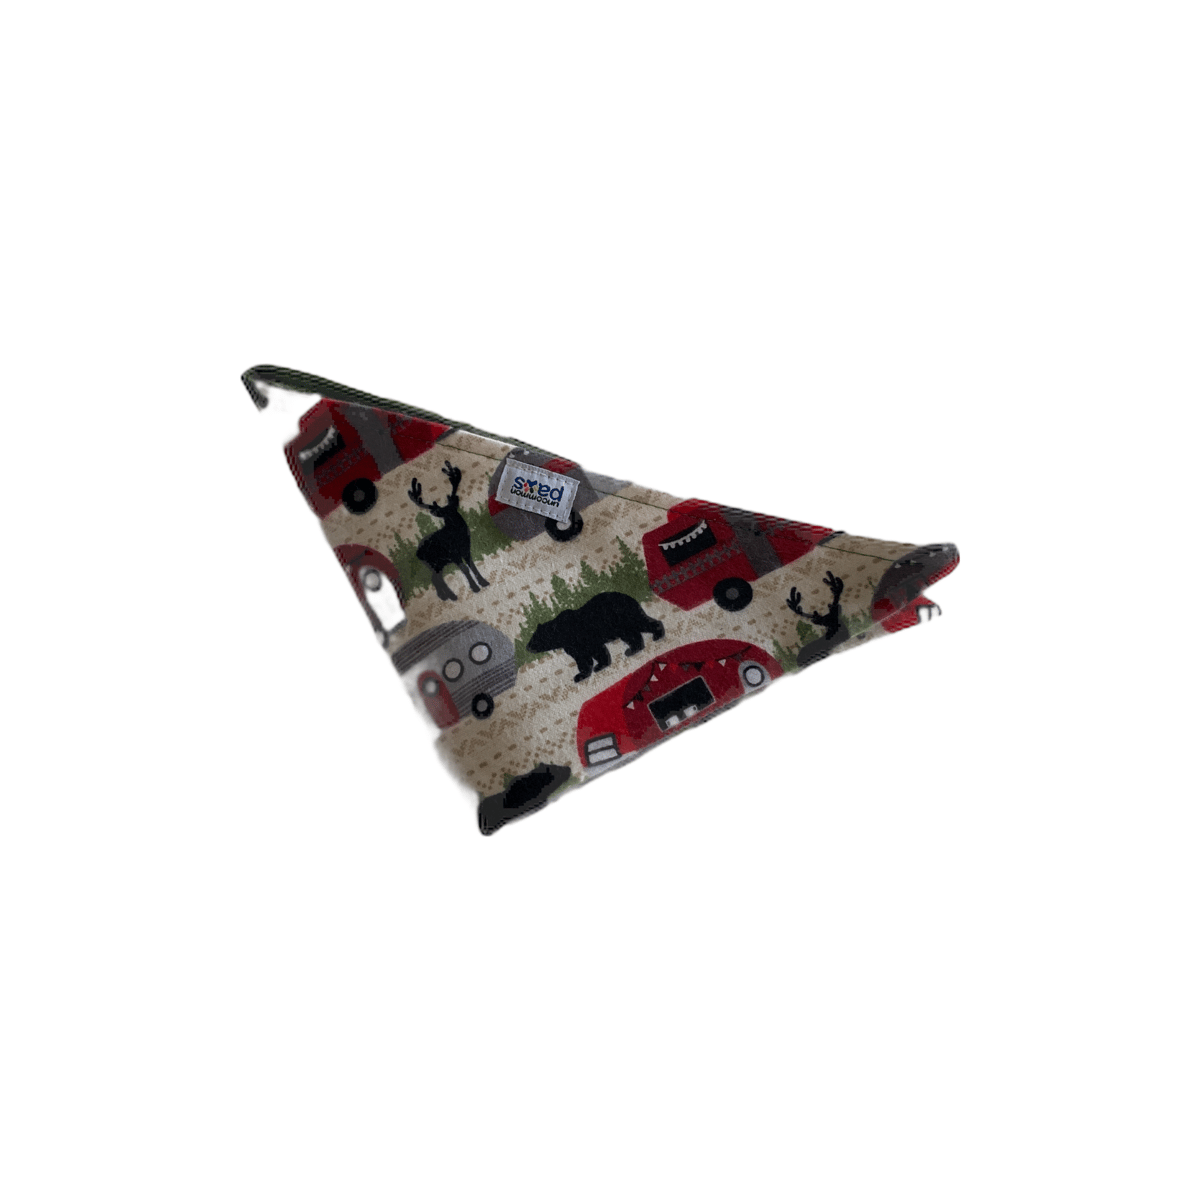 Bear with red Camper flannel - Bandana